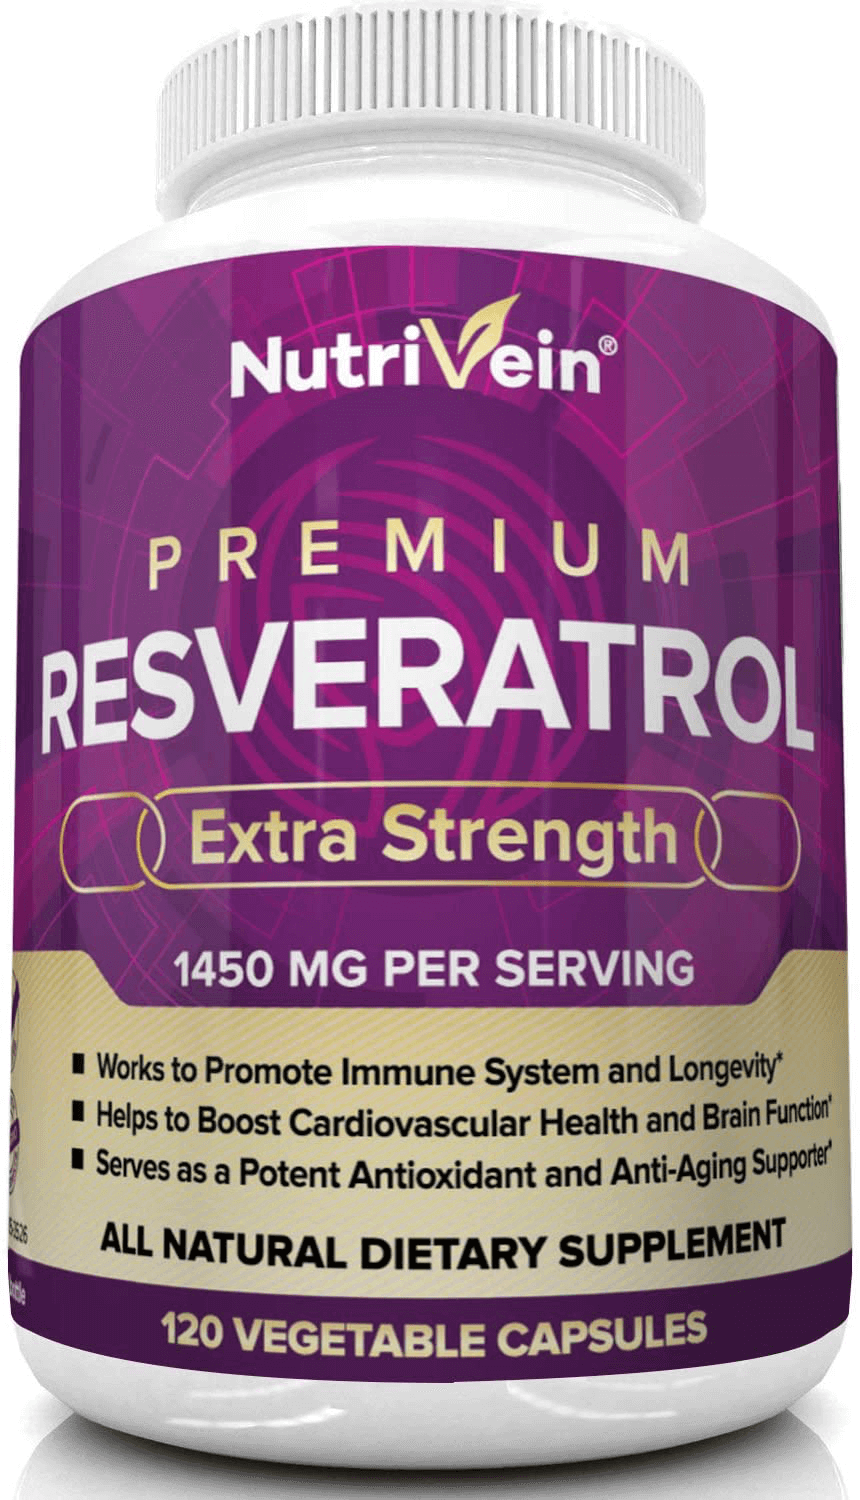 Nutrivein Resveratrol 1450mg - Antioxidant Supplement 120 Capsules – Supports Healthy Aging and Promotes Immune, Blood Sugar and Joint Support - Made with Trans-Resveratrol, Green Tea Leaf, Acai Berry - vitamenstore.com